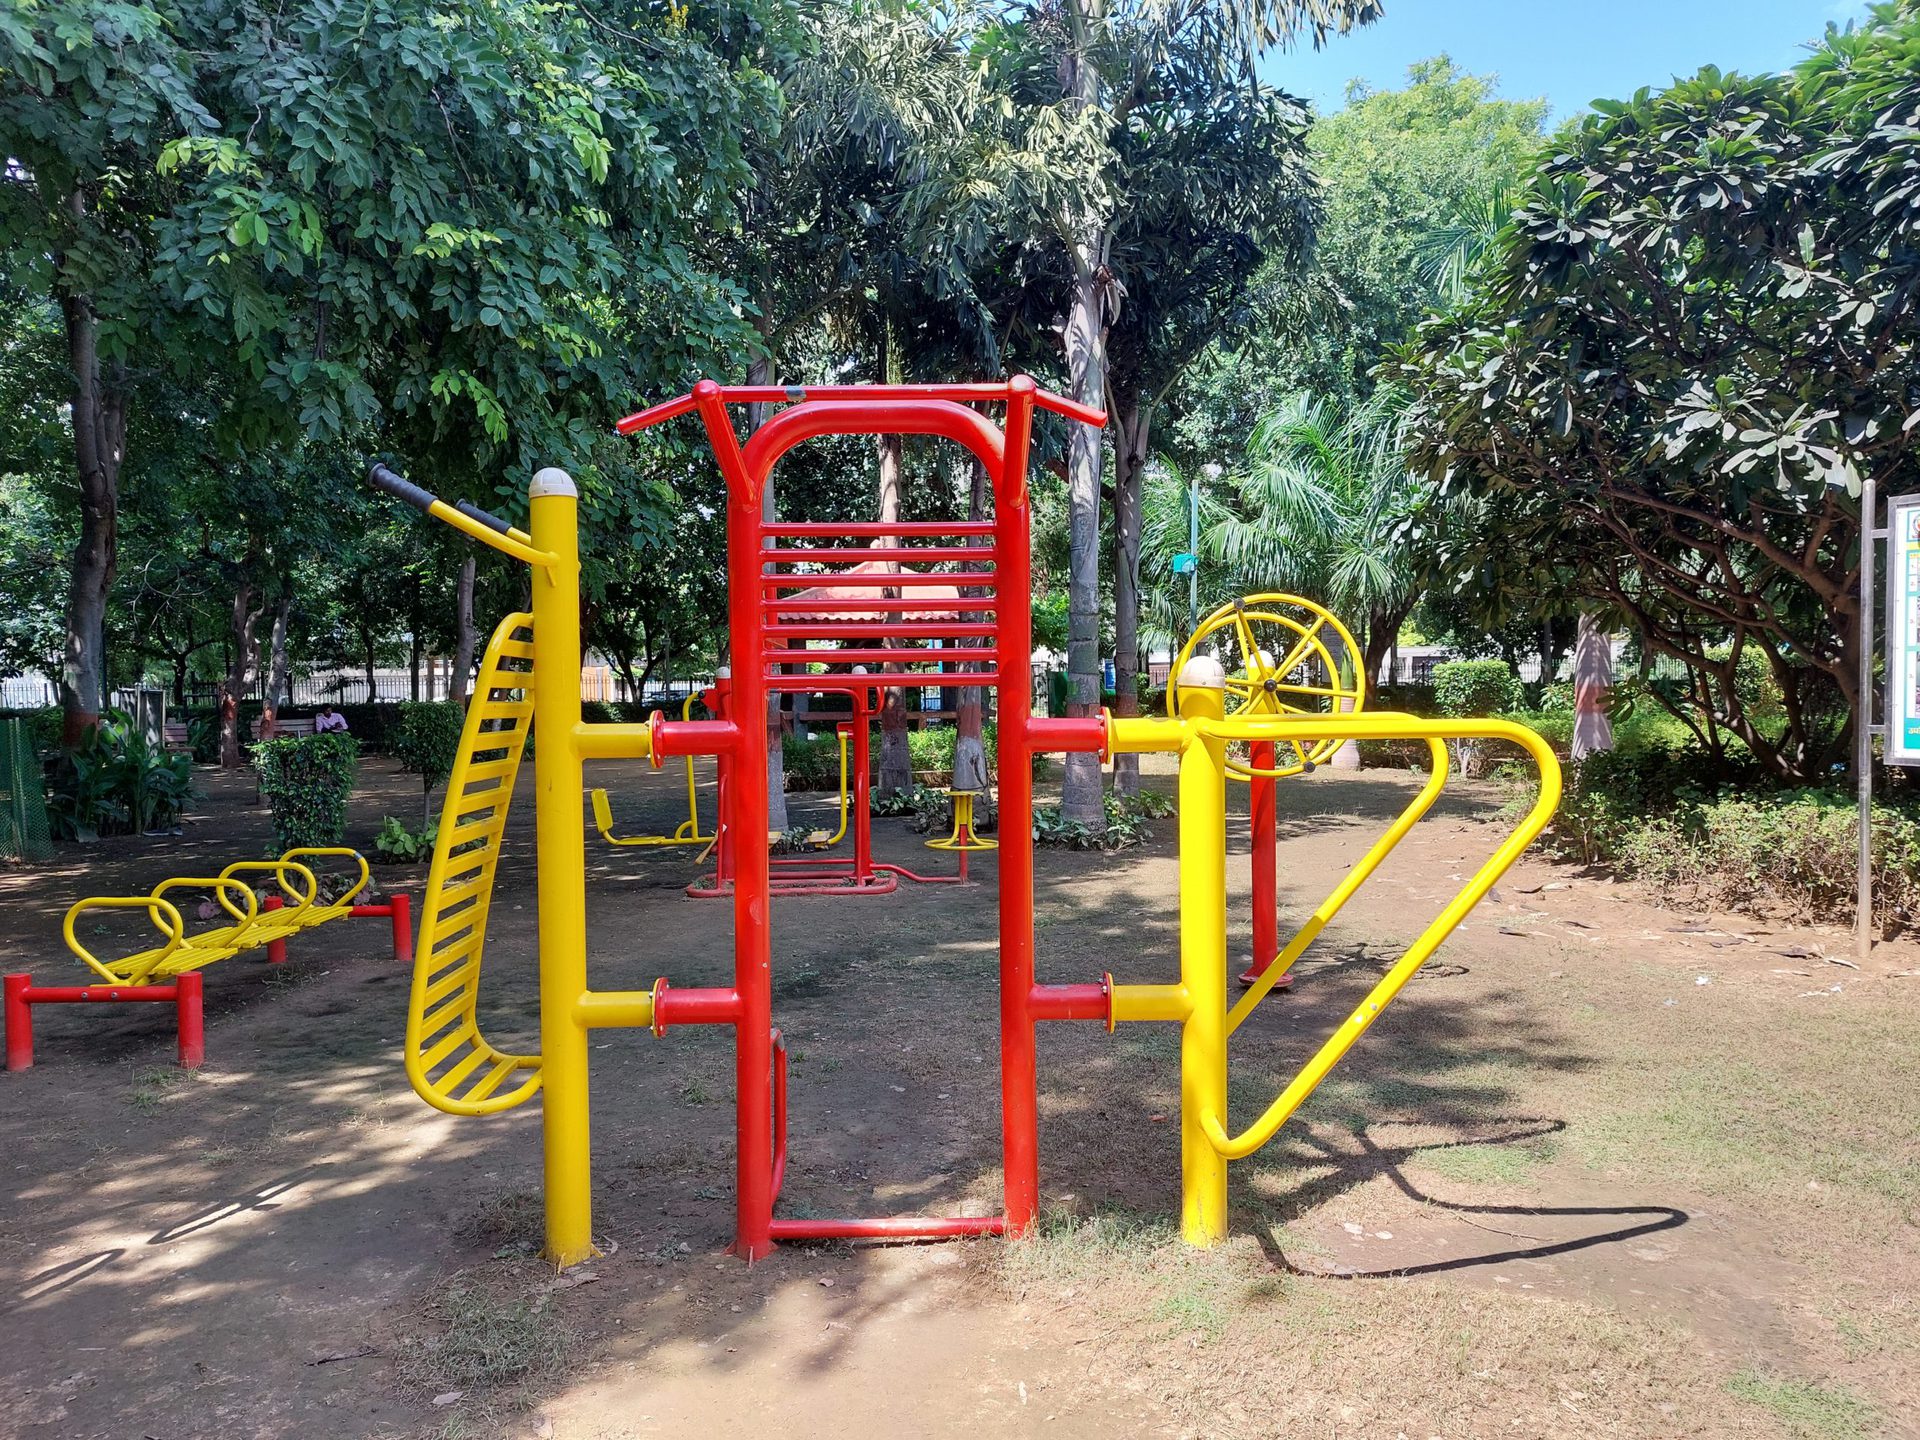 Samsung Galaxy A52s 5G bright outdoor shot of a red and yellow climbing frame in a park.